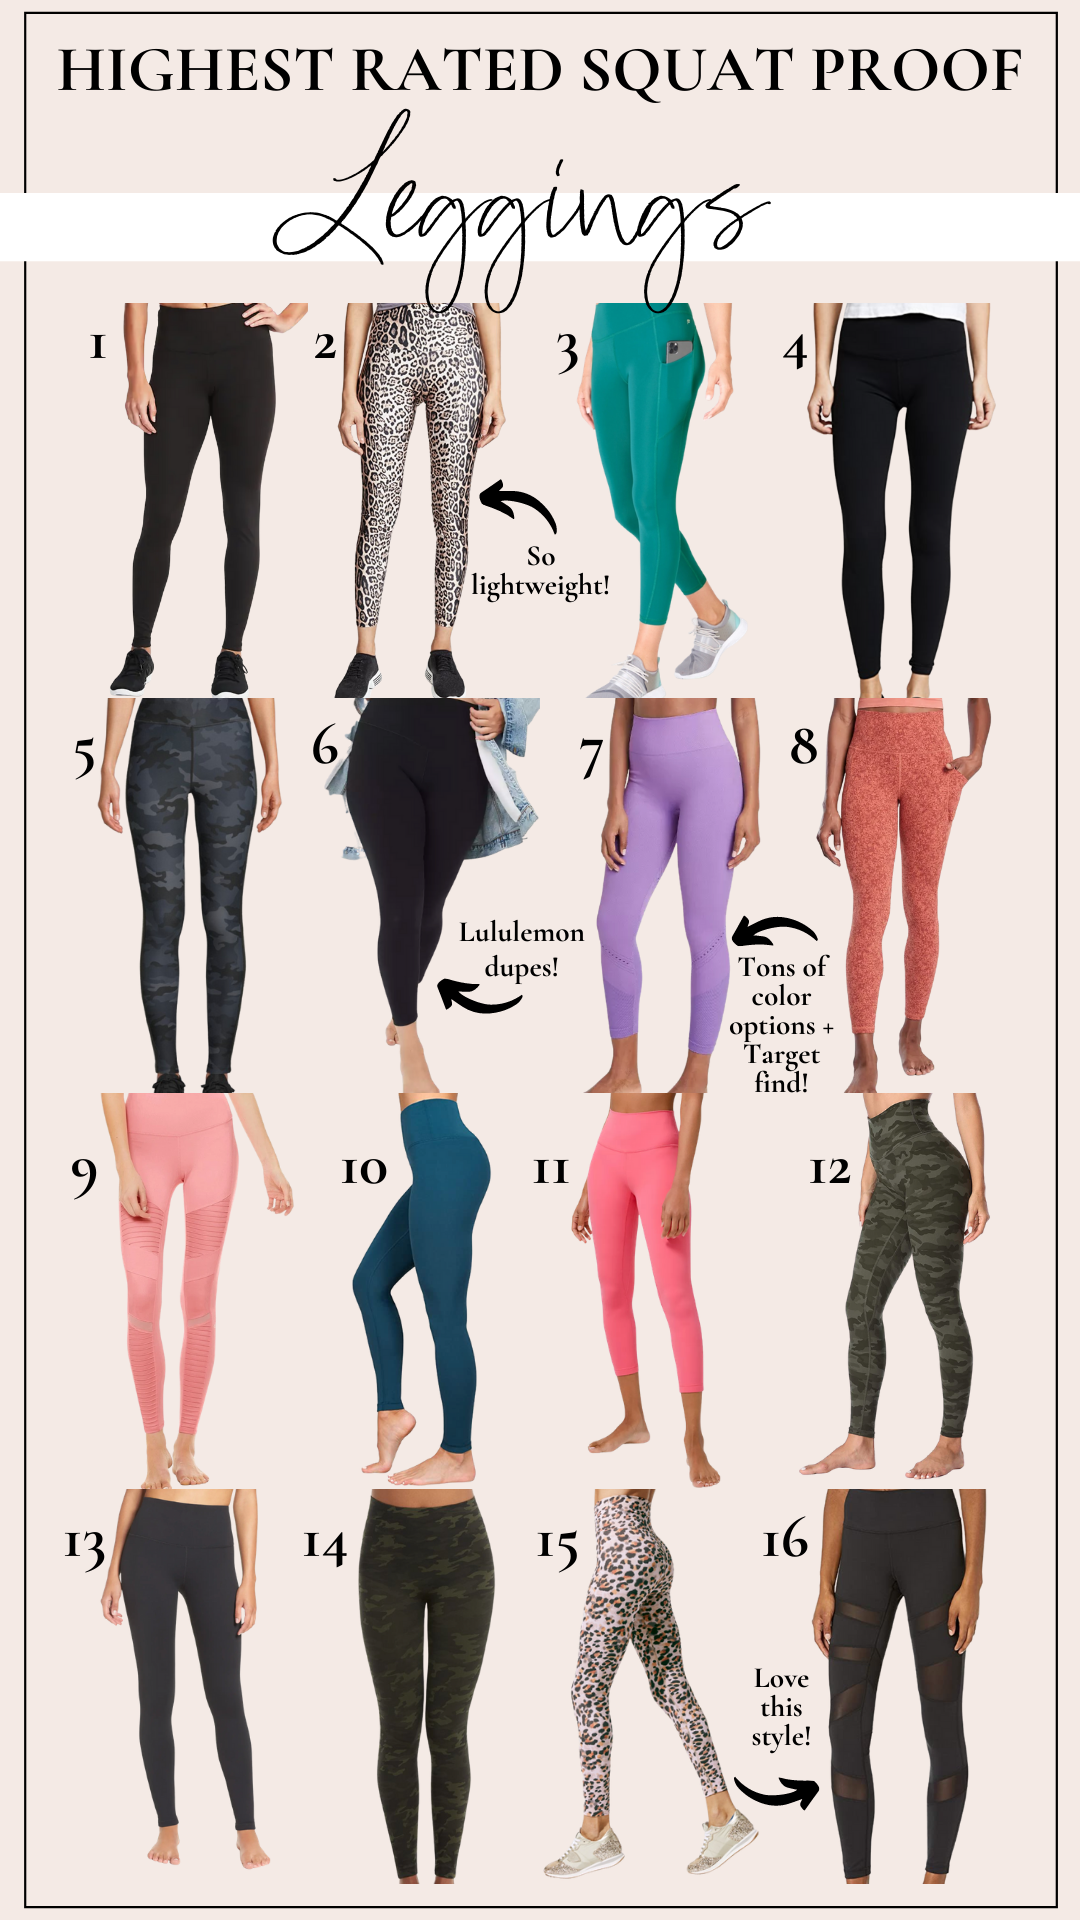 Fitness: Top 16 Best Squat Proof Leggings For Women by Alabama Fitness + Fashion blogger, Heather Brown // My Life Well Loved